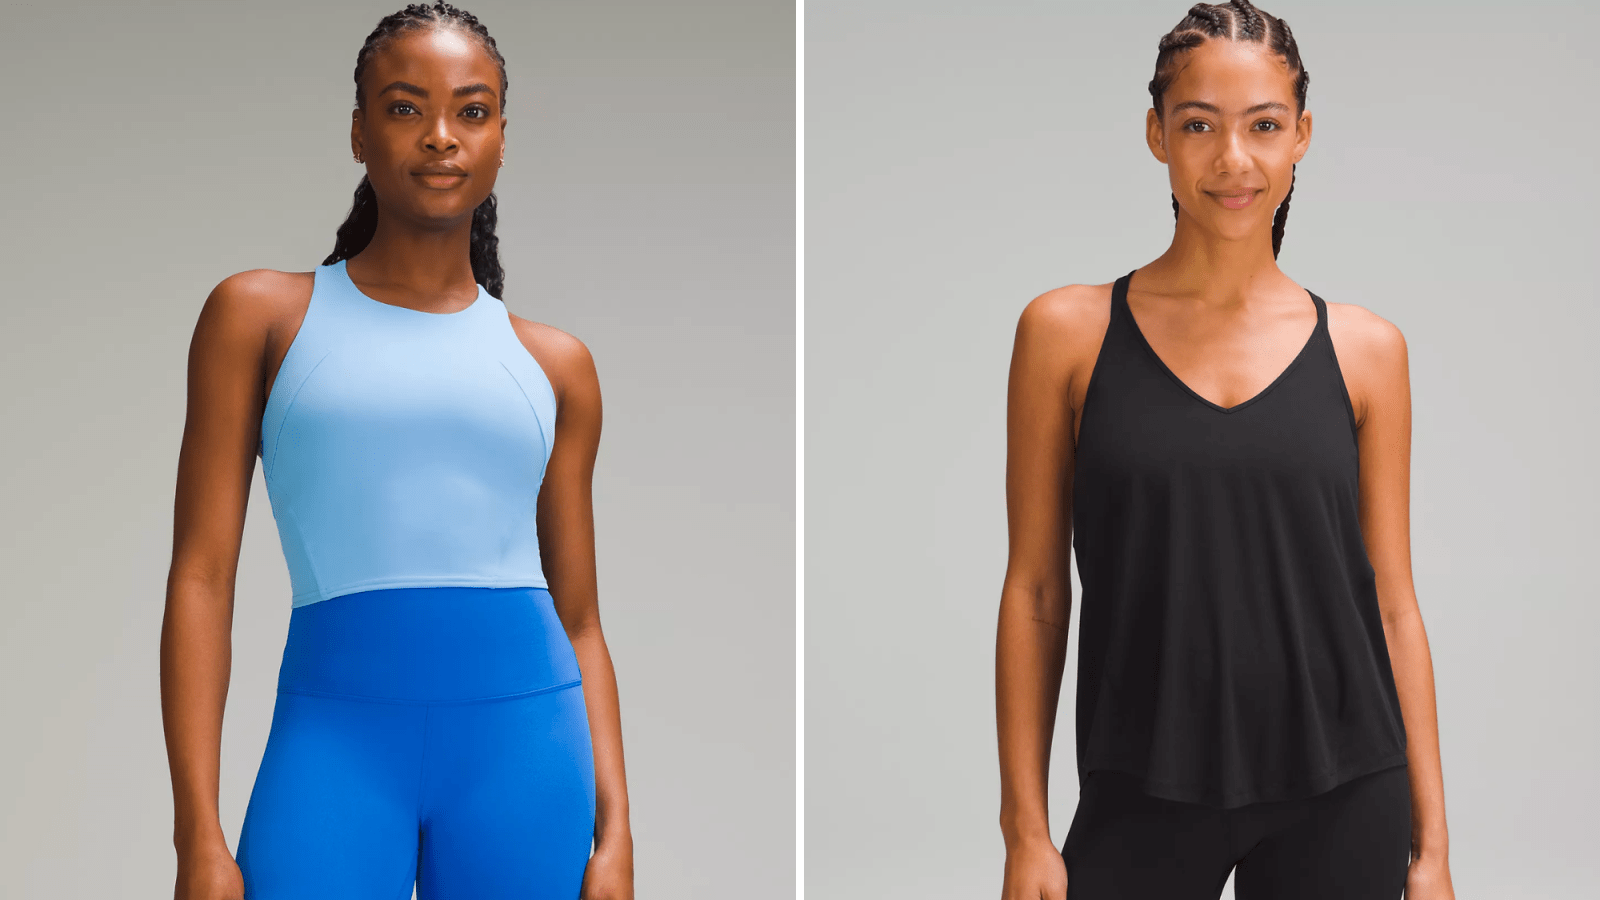 The Best lululemon Pieces on Sale to Kick Off New Year, New You